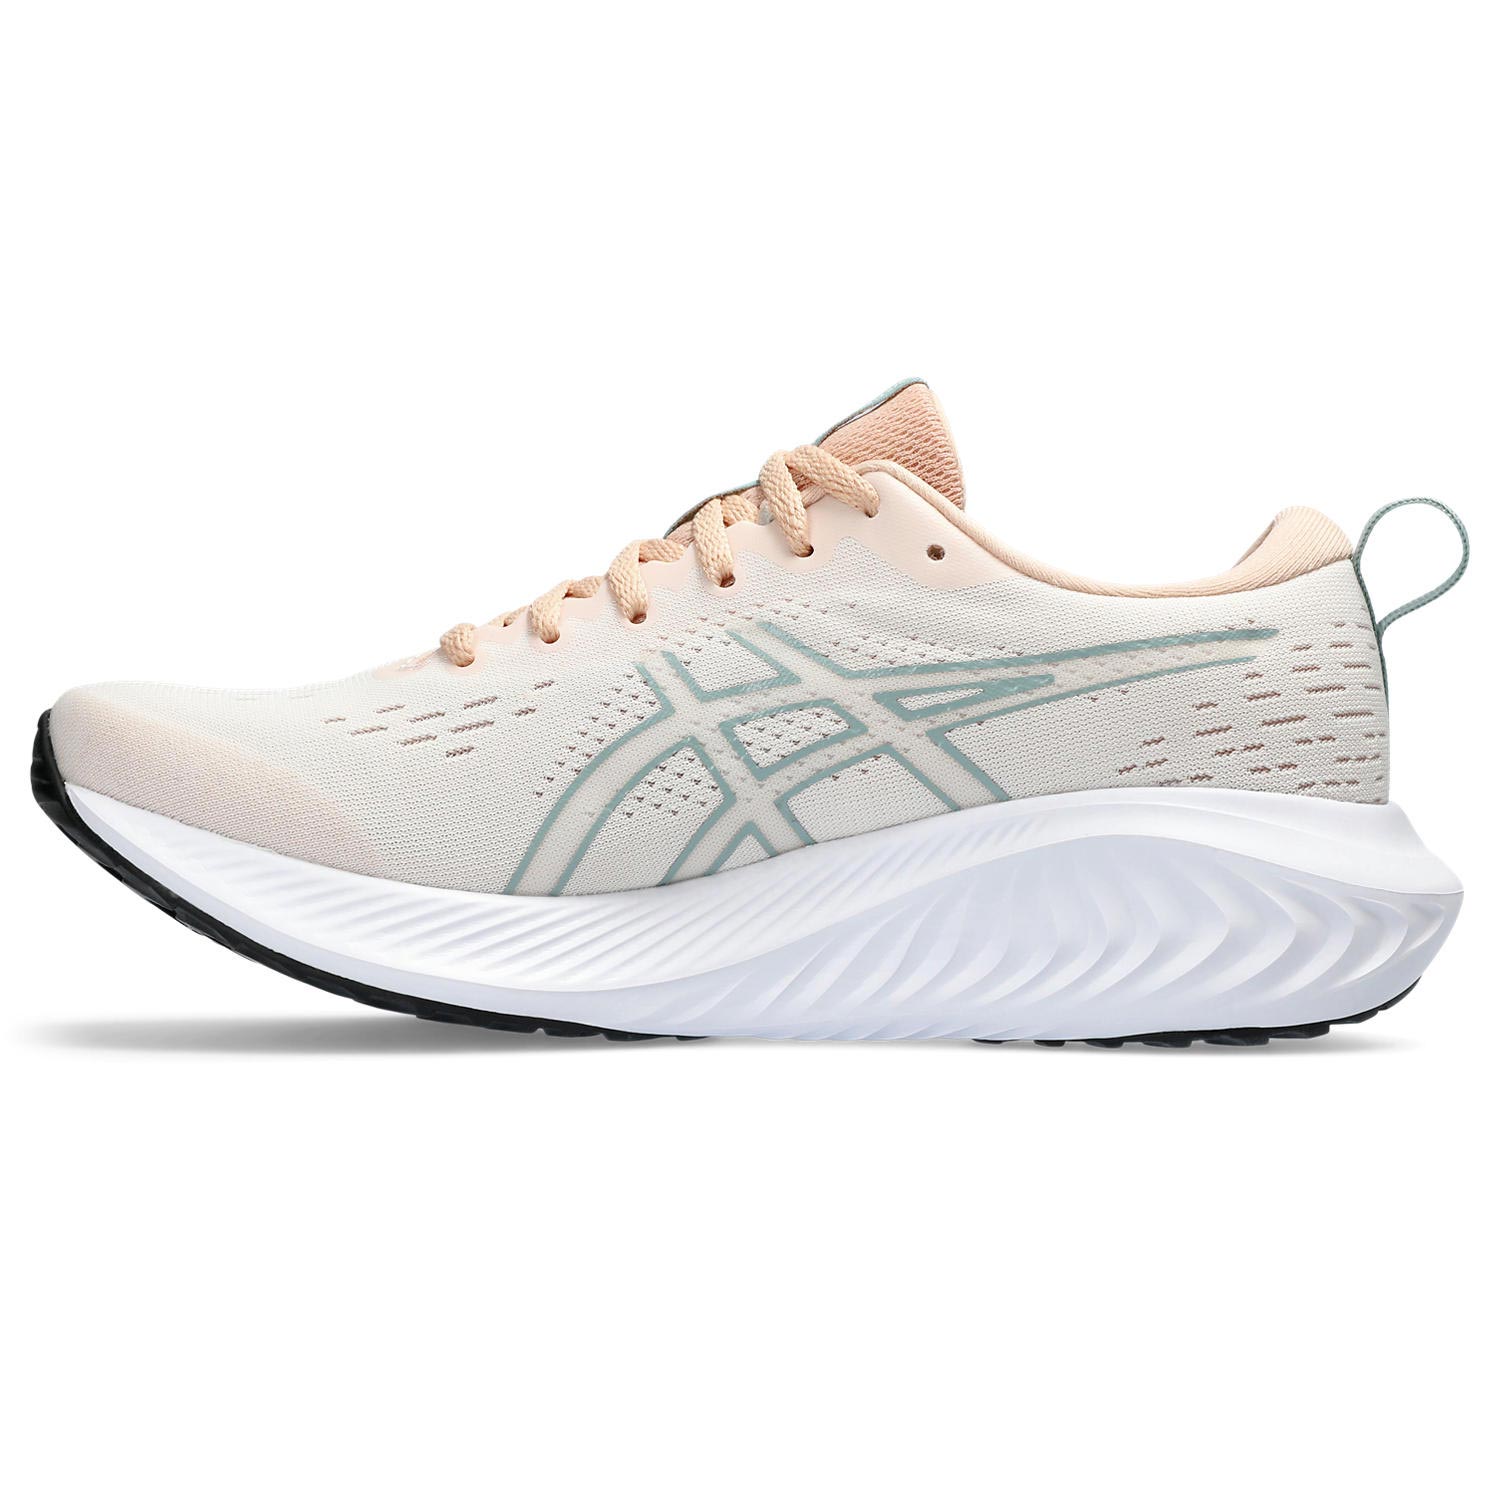 ASICS GEL EXCITE 10 WOMENS RUNNING SHOES